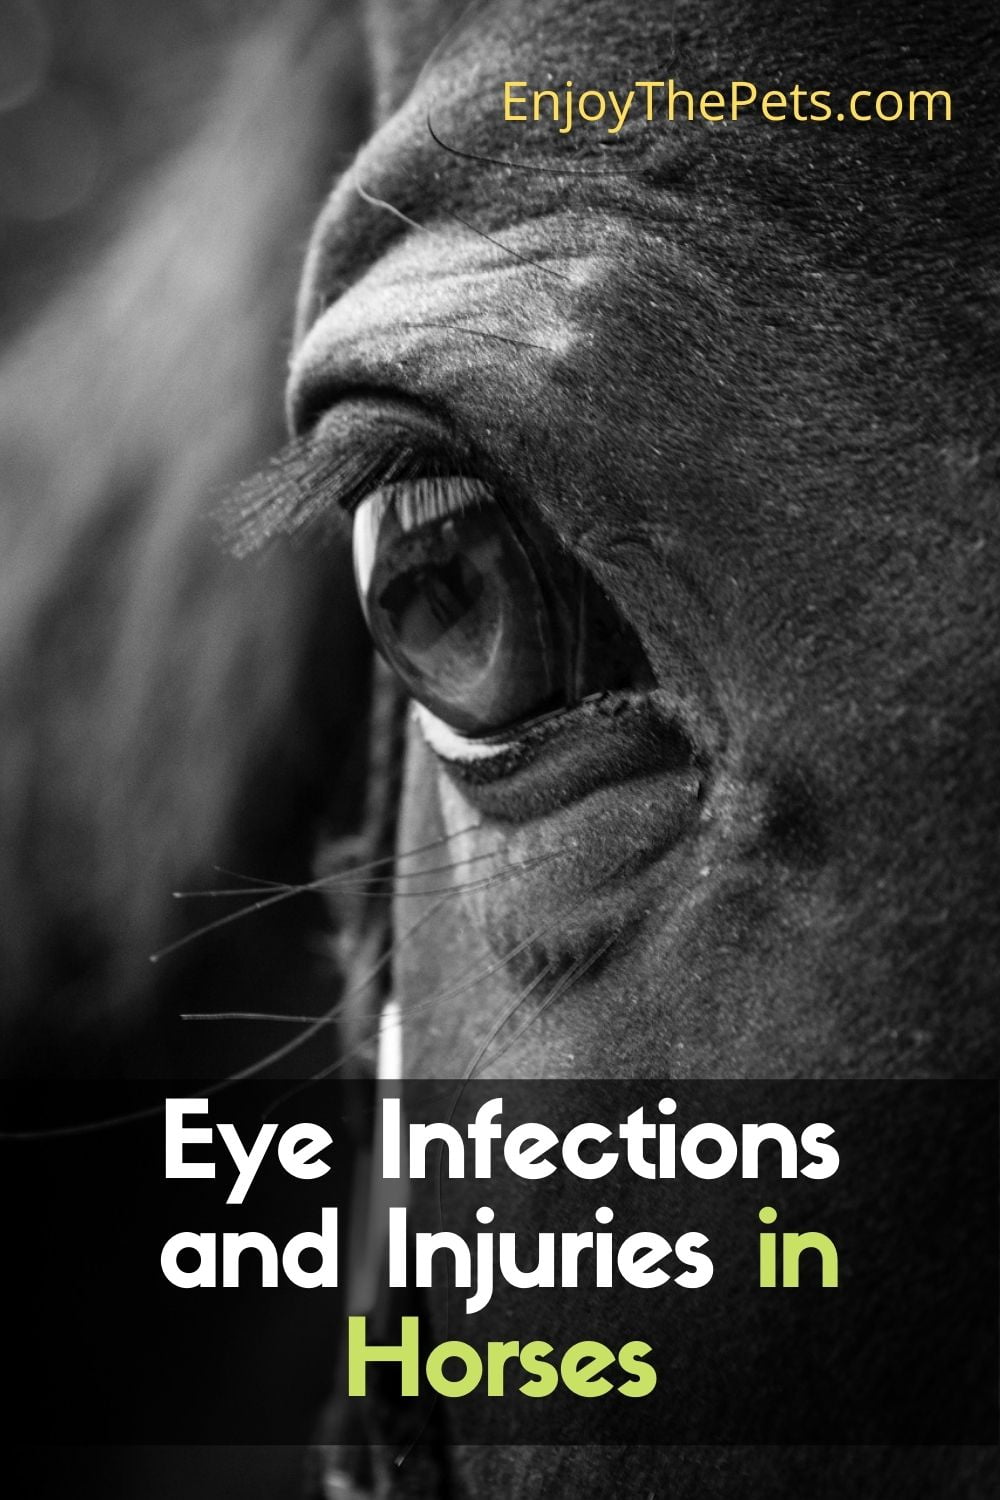 Eye Infections and Injuries in Horses